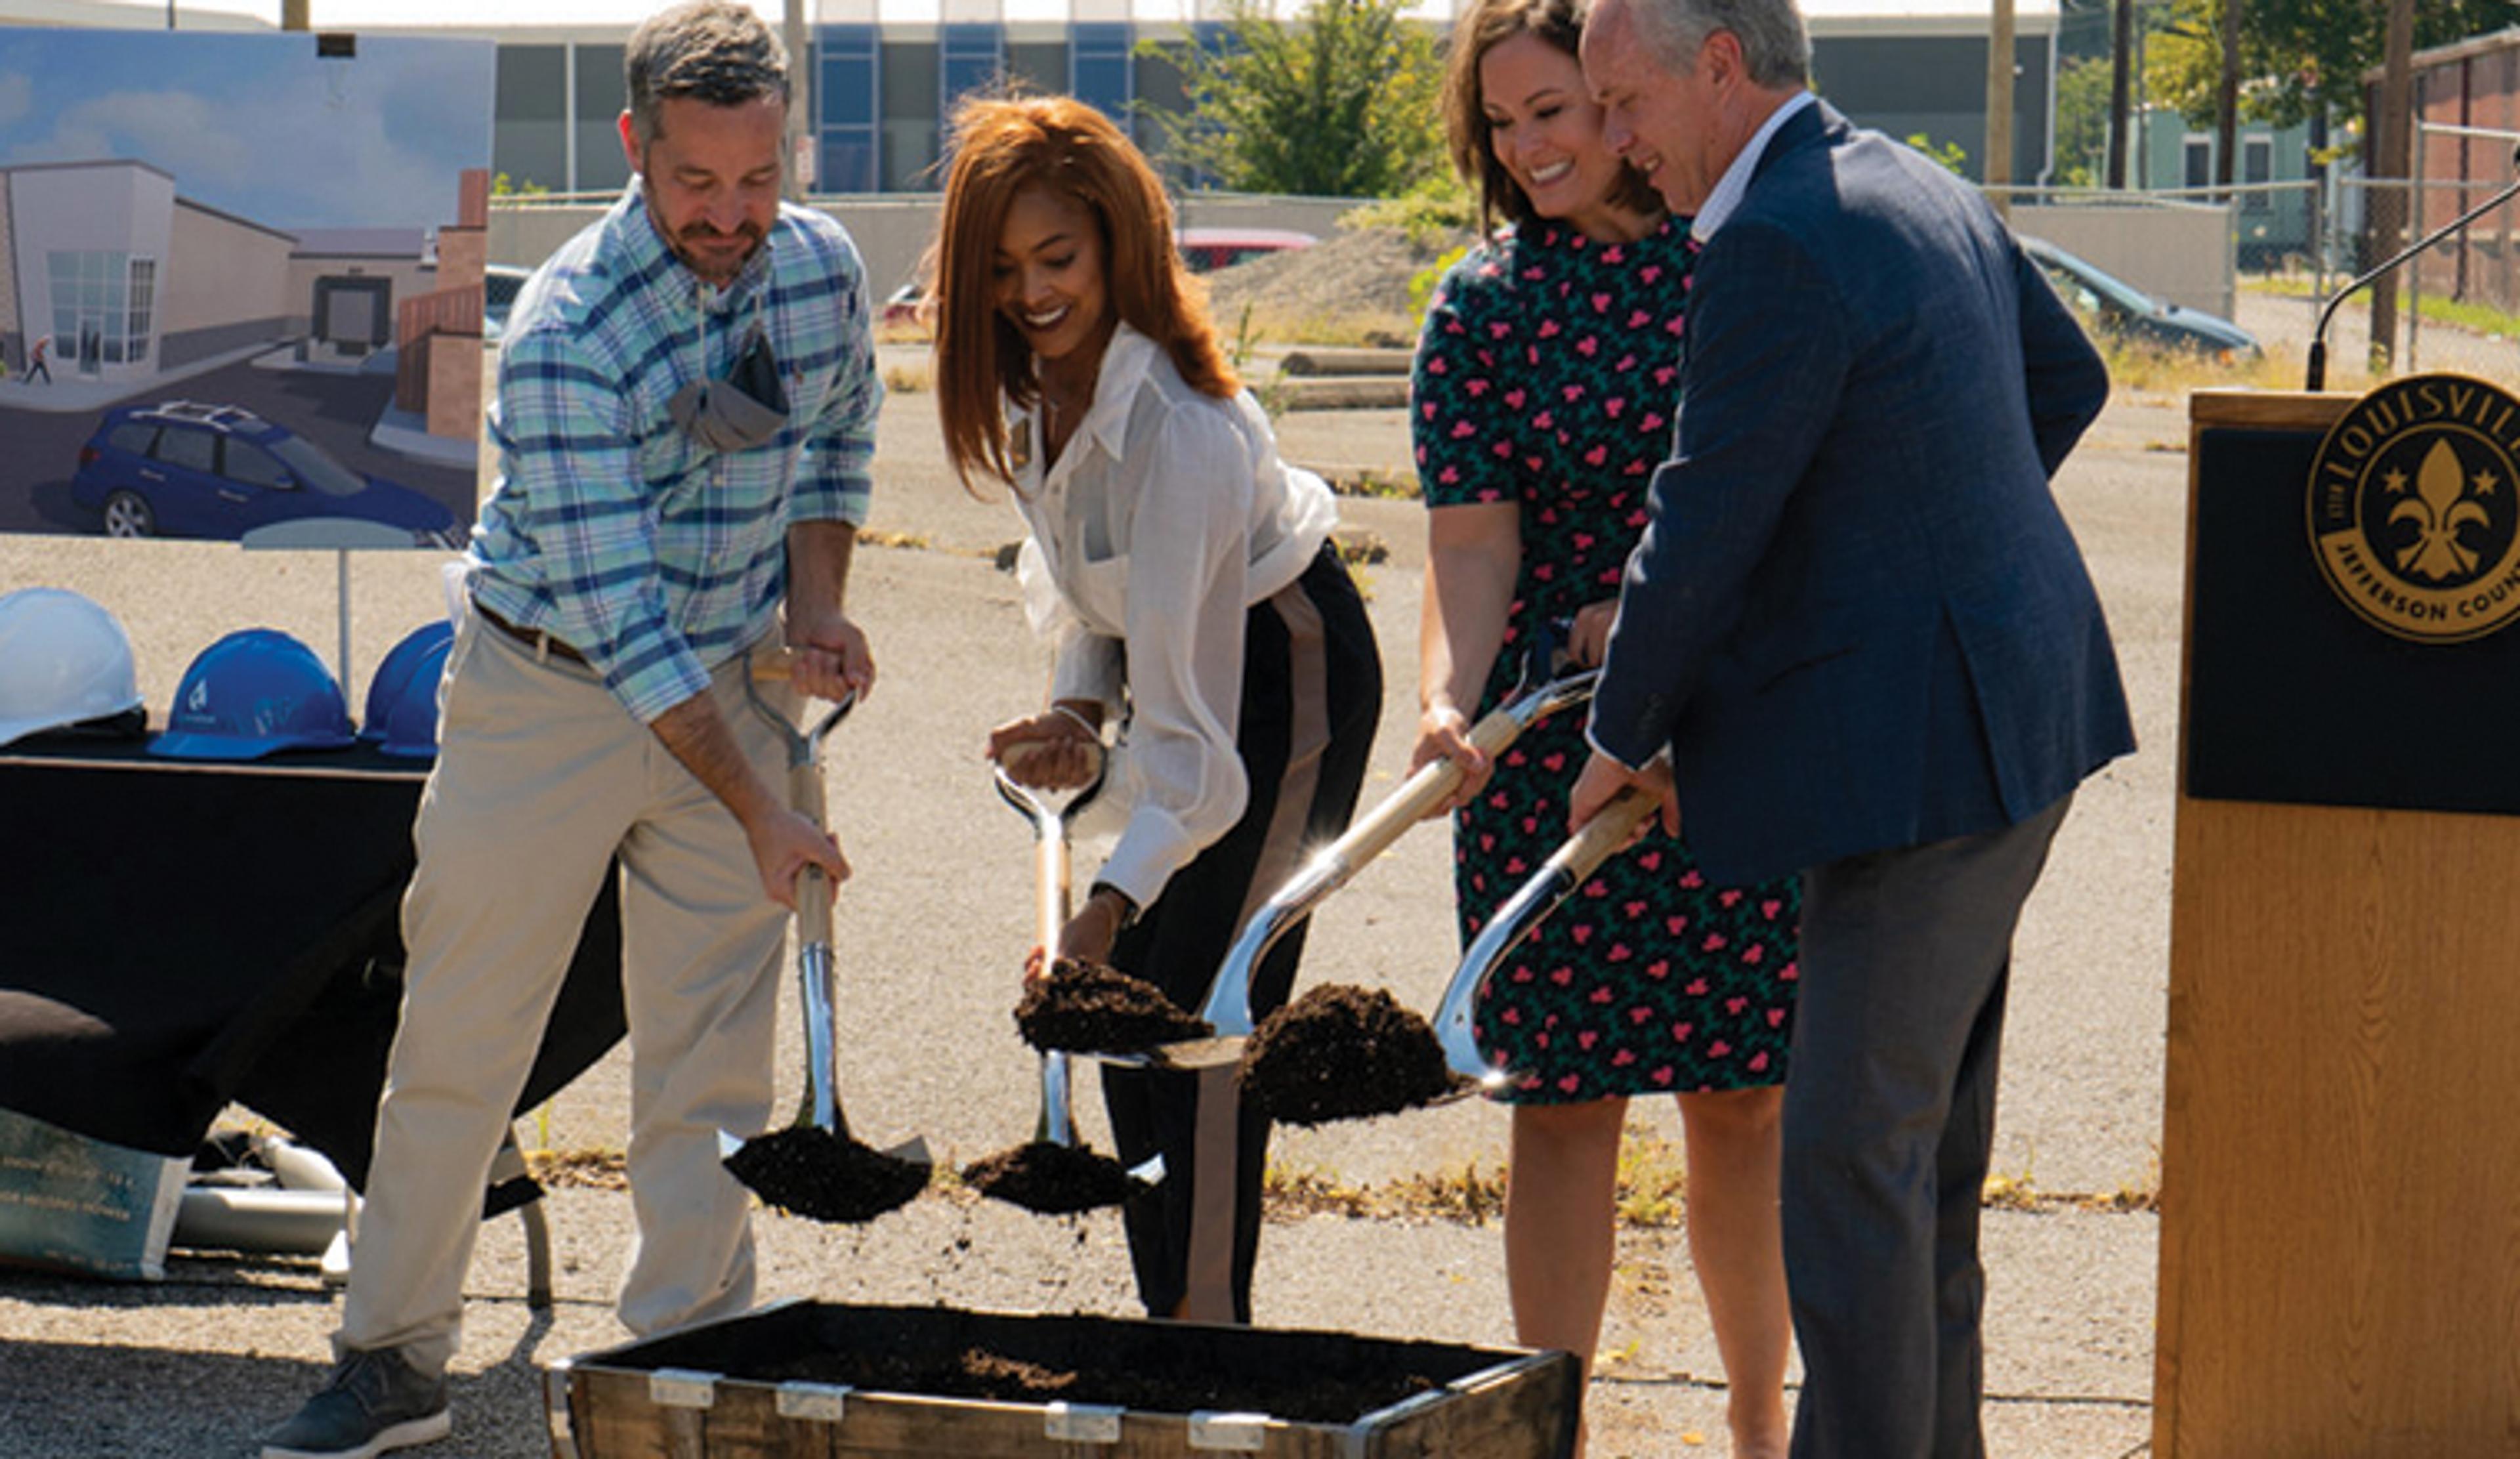 Louisville Mayor Greg Fischer, other local and state officials, and Flavorman employees attended a groundbreaking.